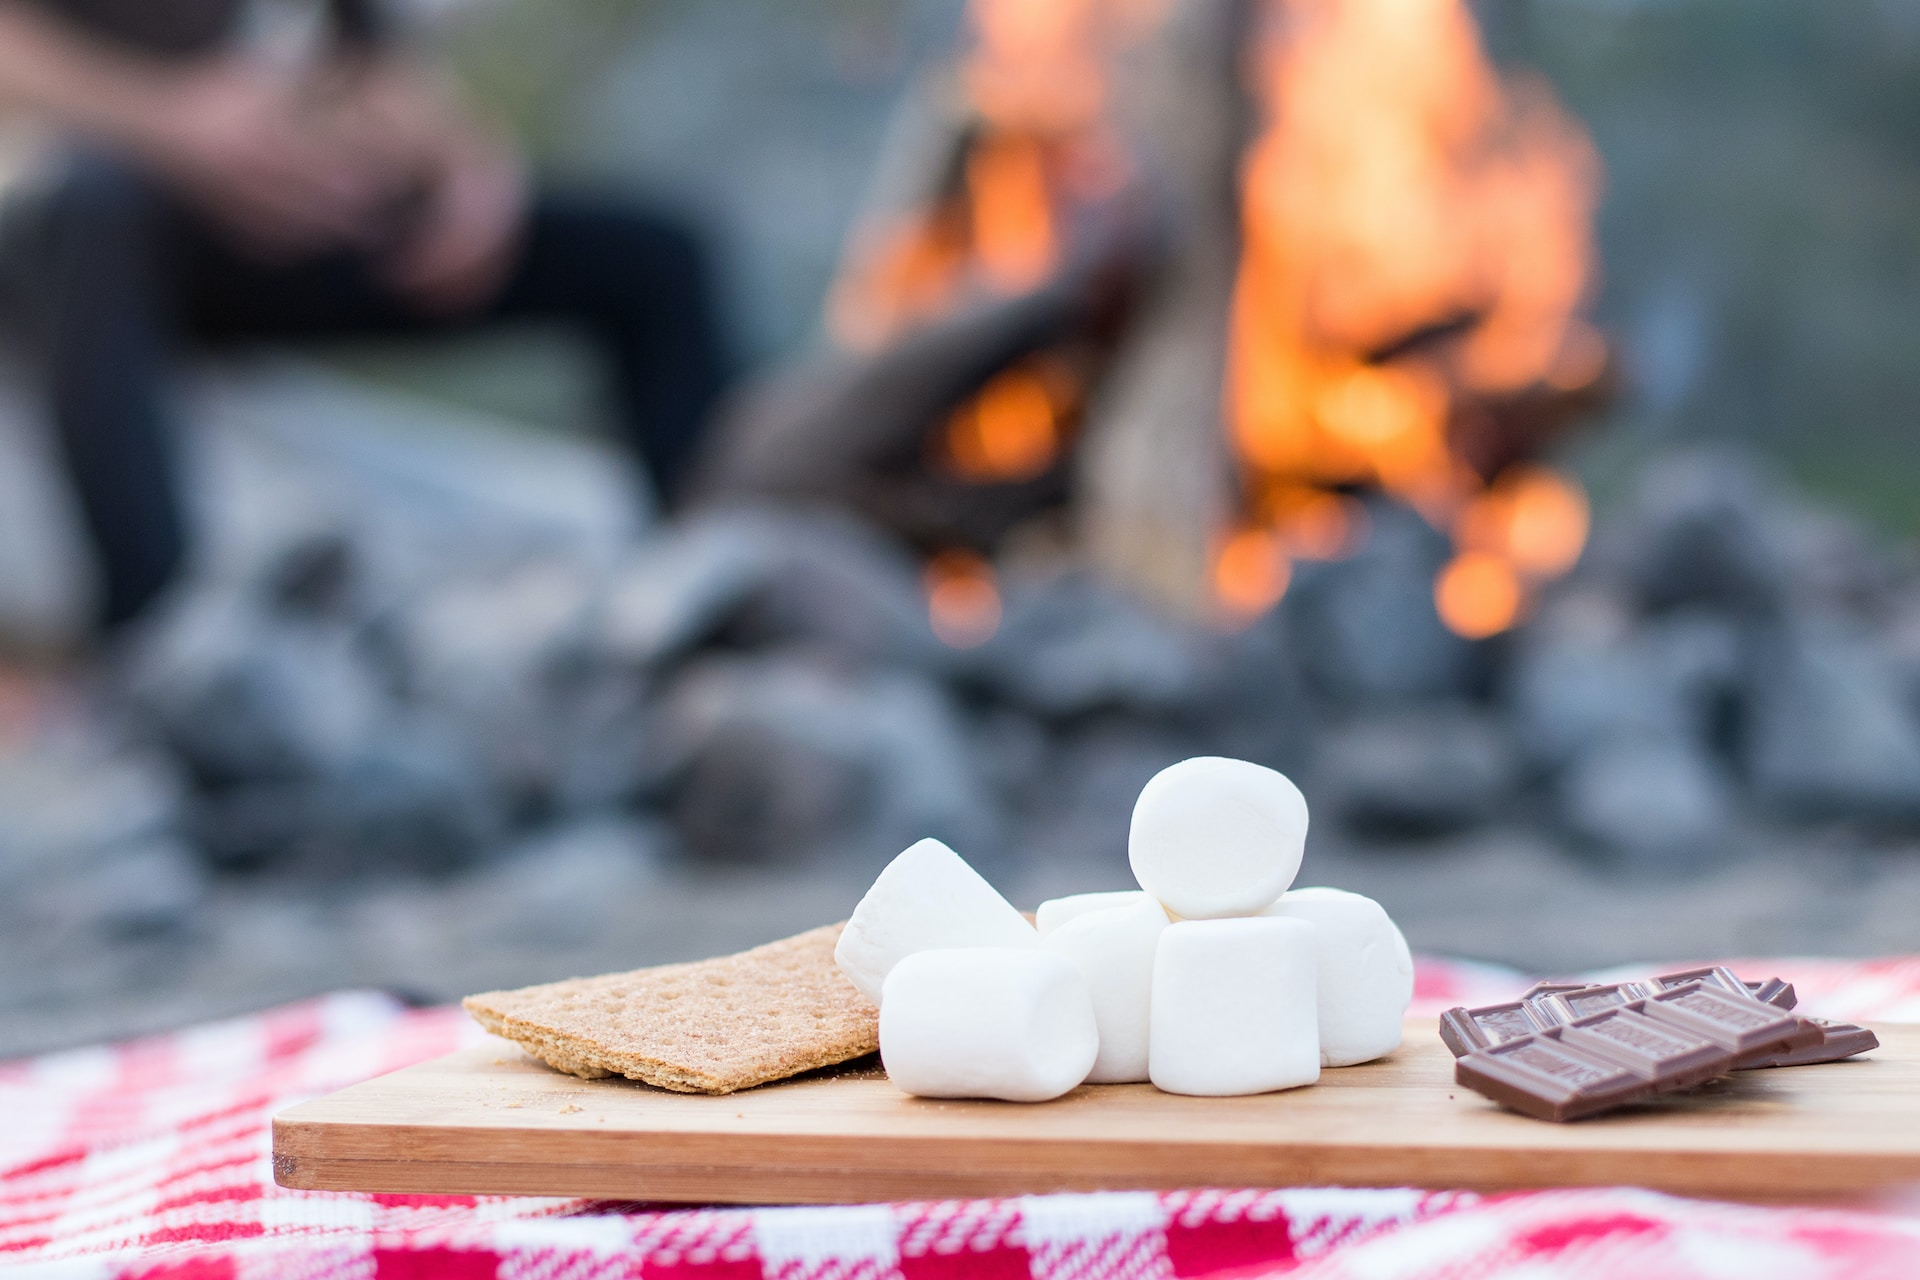 Create this campfire favourite right in your own home with a microwave! Just layer chocolate chips and marshmallows in a dish, microwave until gooey and melted, and then dip with some graham crackers. It's a fun, super easy-to-make, communal dessert that'll bring smiles to everyone's faces.